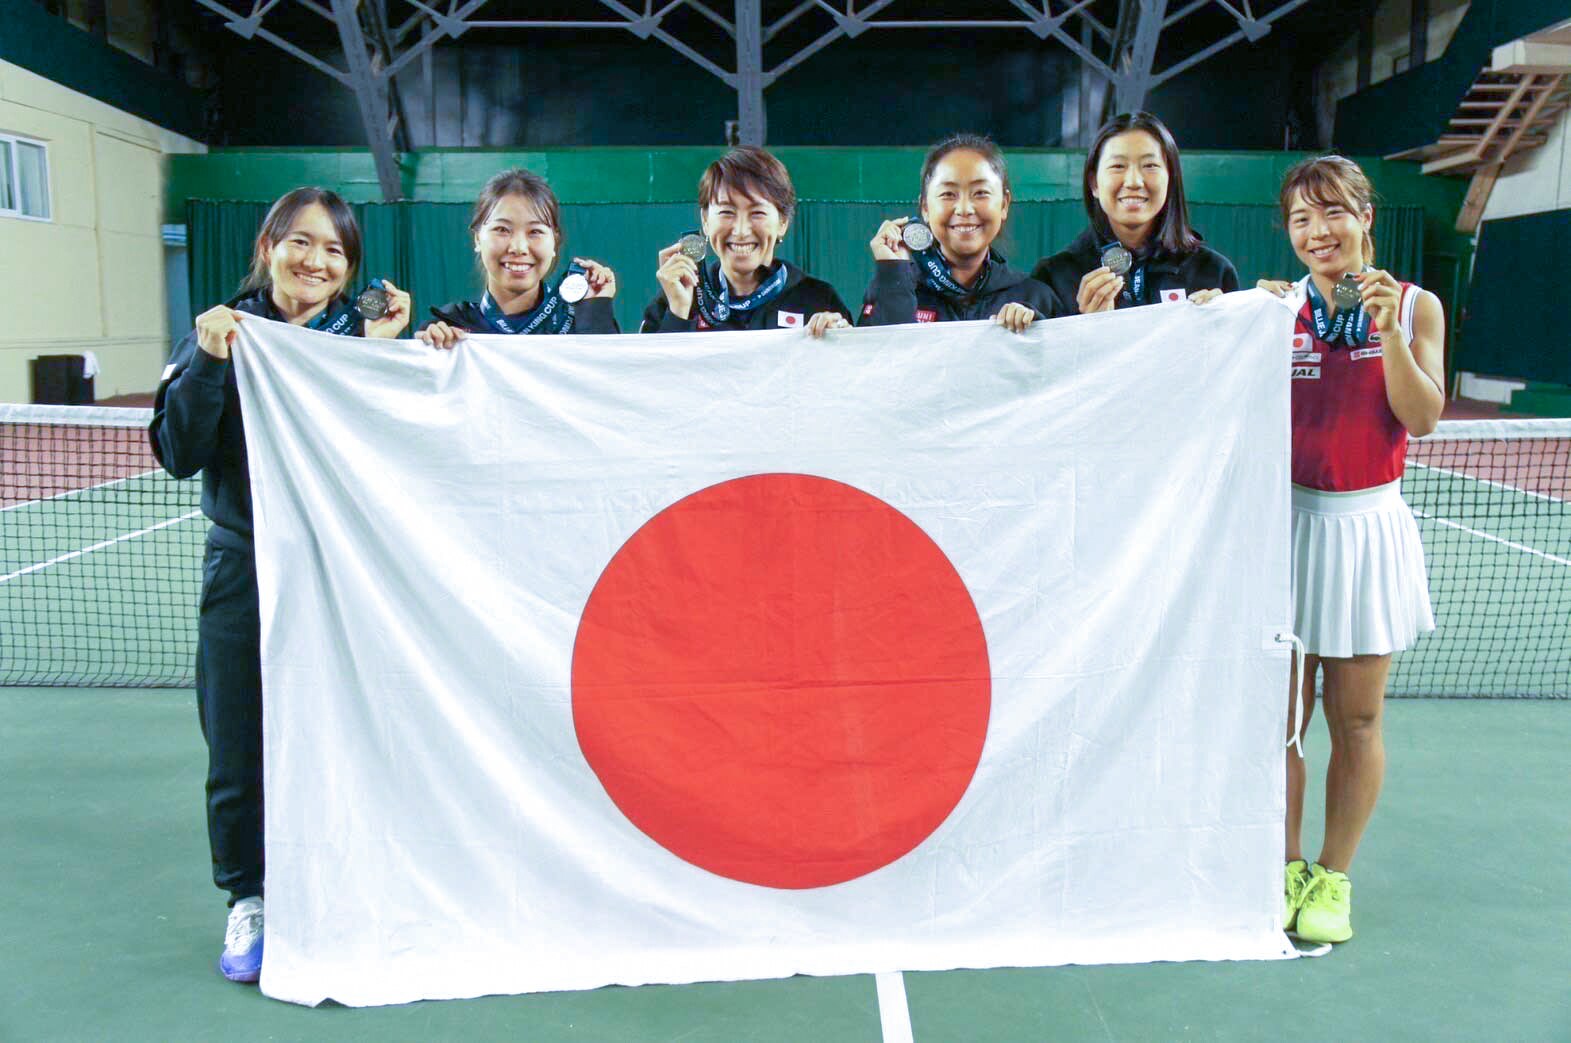 Members of the Japanese National Team (Hontama is on the far right)